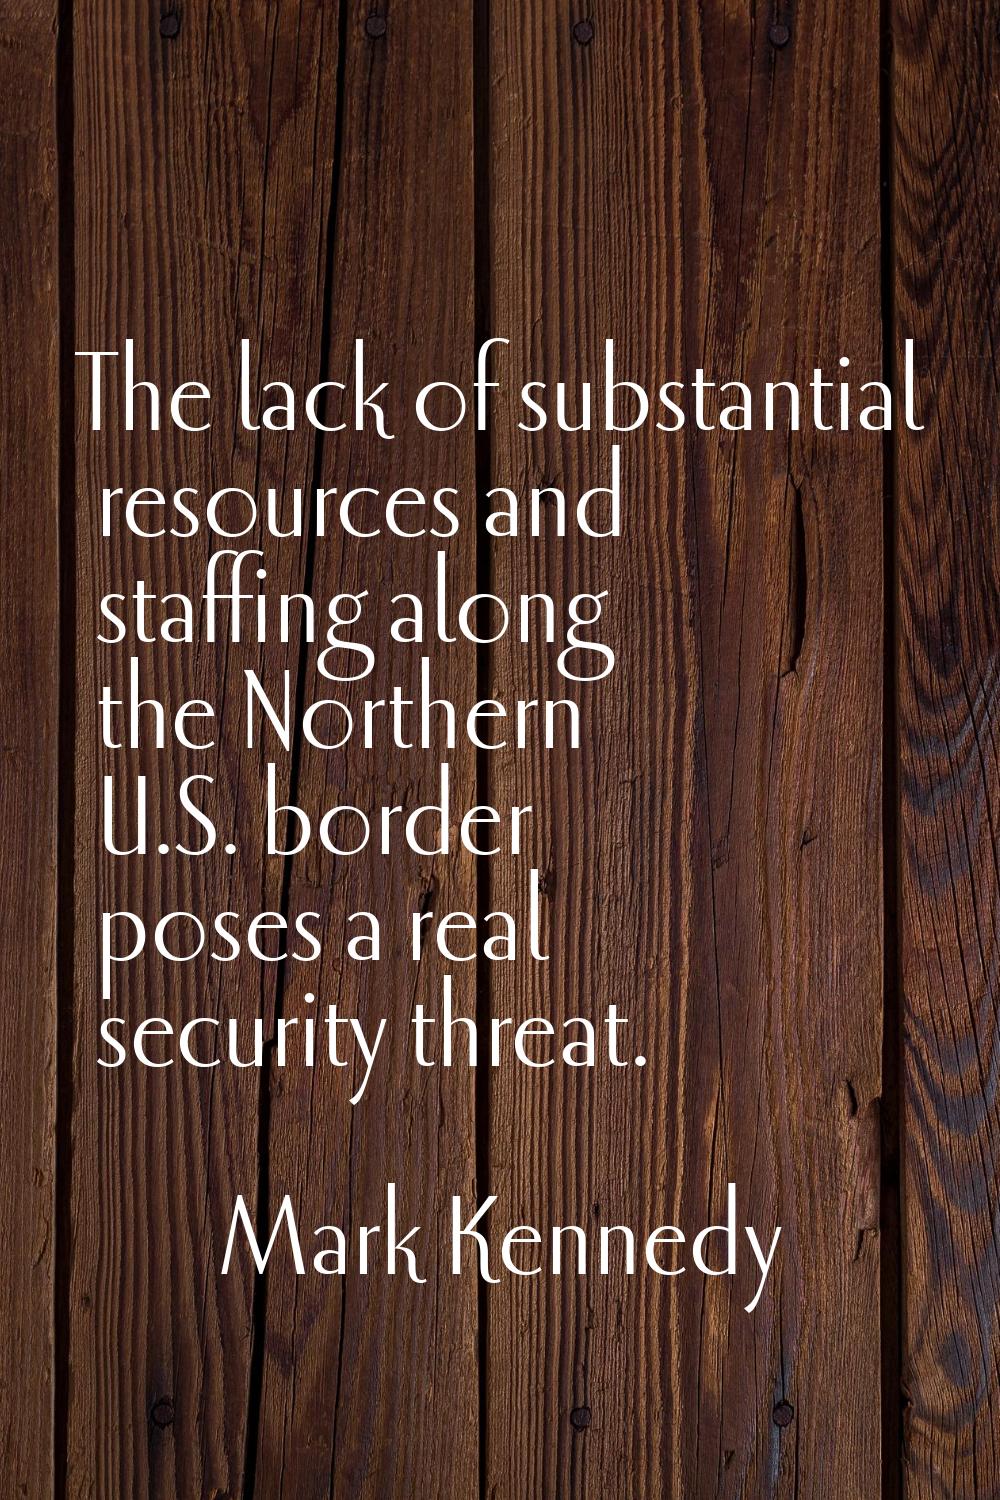 The lack of substantial resources and staffing along the Northern U.S. border poses a real security